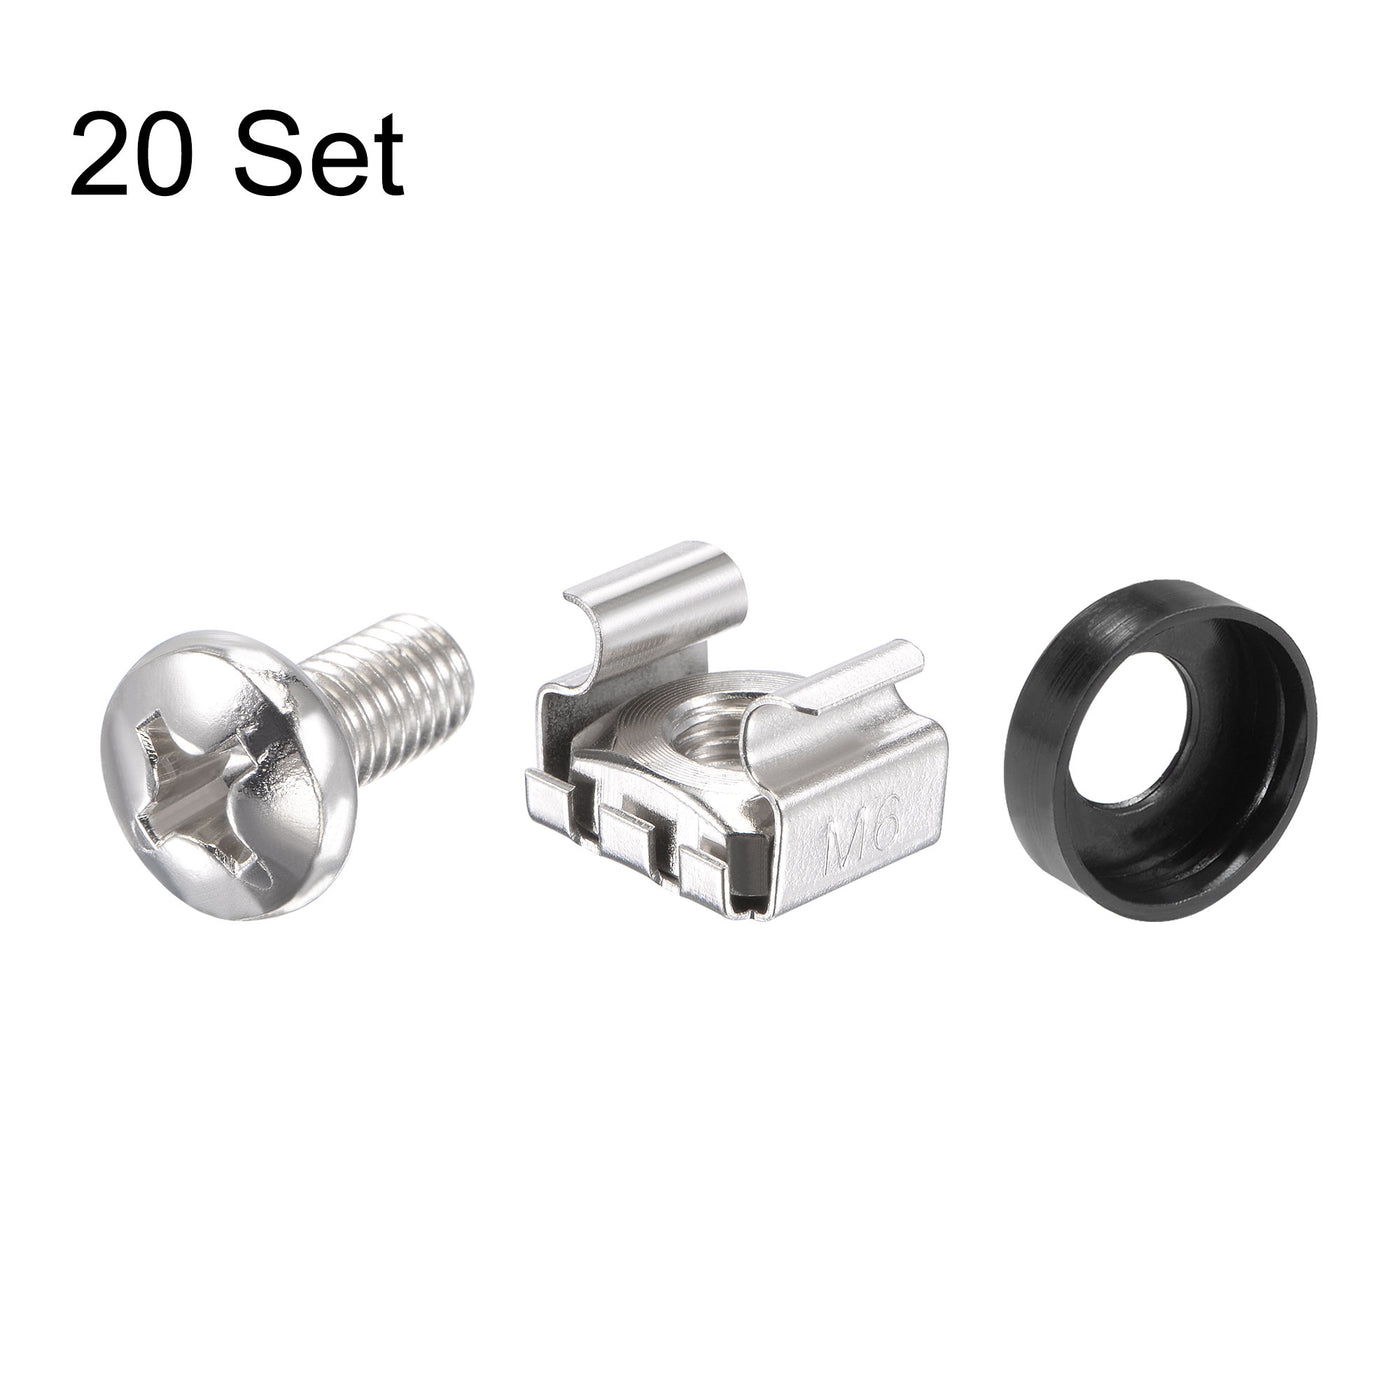 uxcell Uxcell M6x12mm Server Rack Cage Nuts Silver Tone 20Set, Mounting Screws for Server Shelves